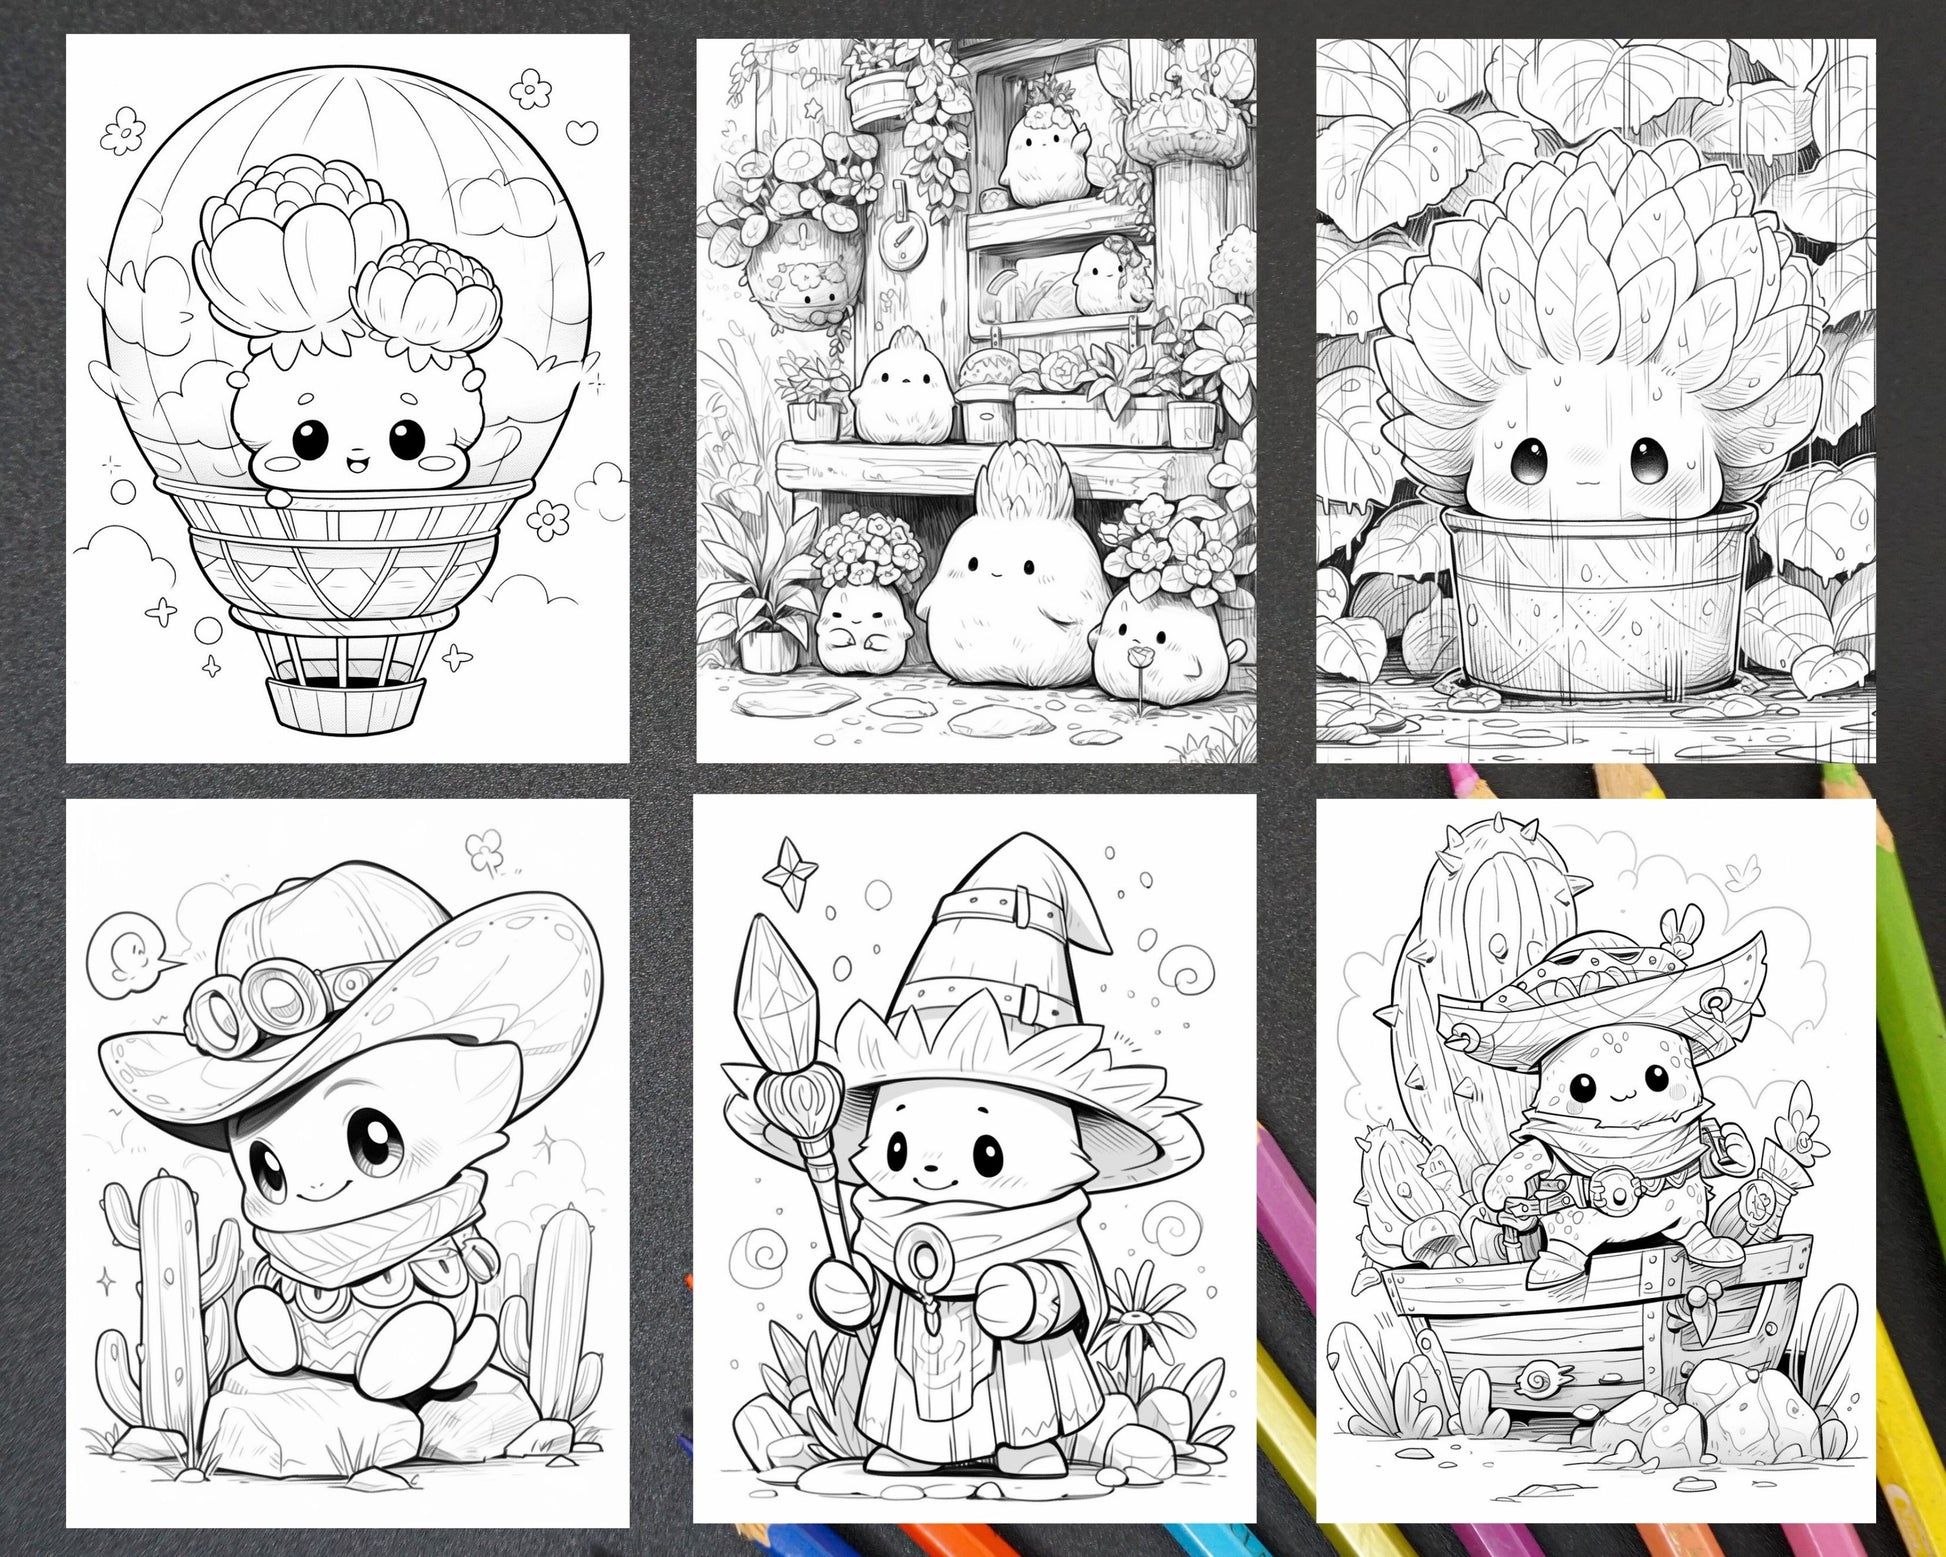 60 Cute Cactus Adventure Grayscale Coloring Pages for Adults